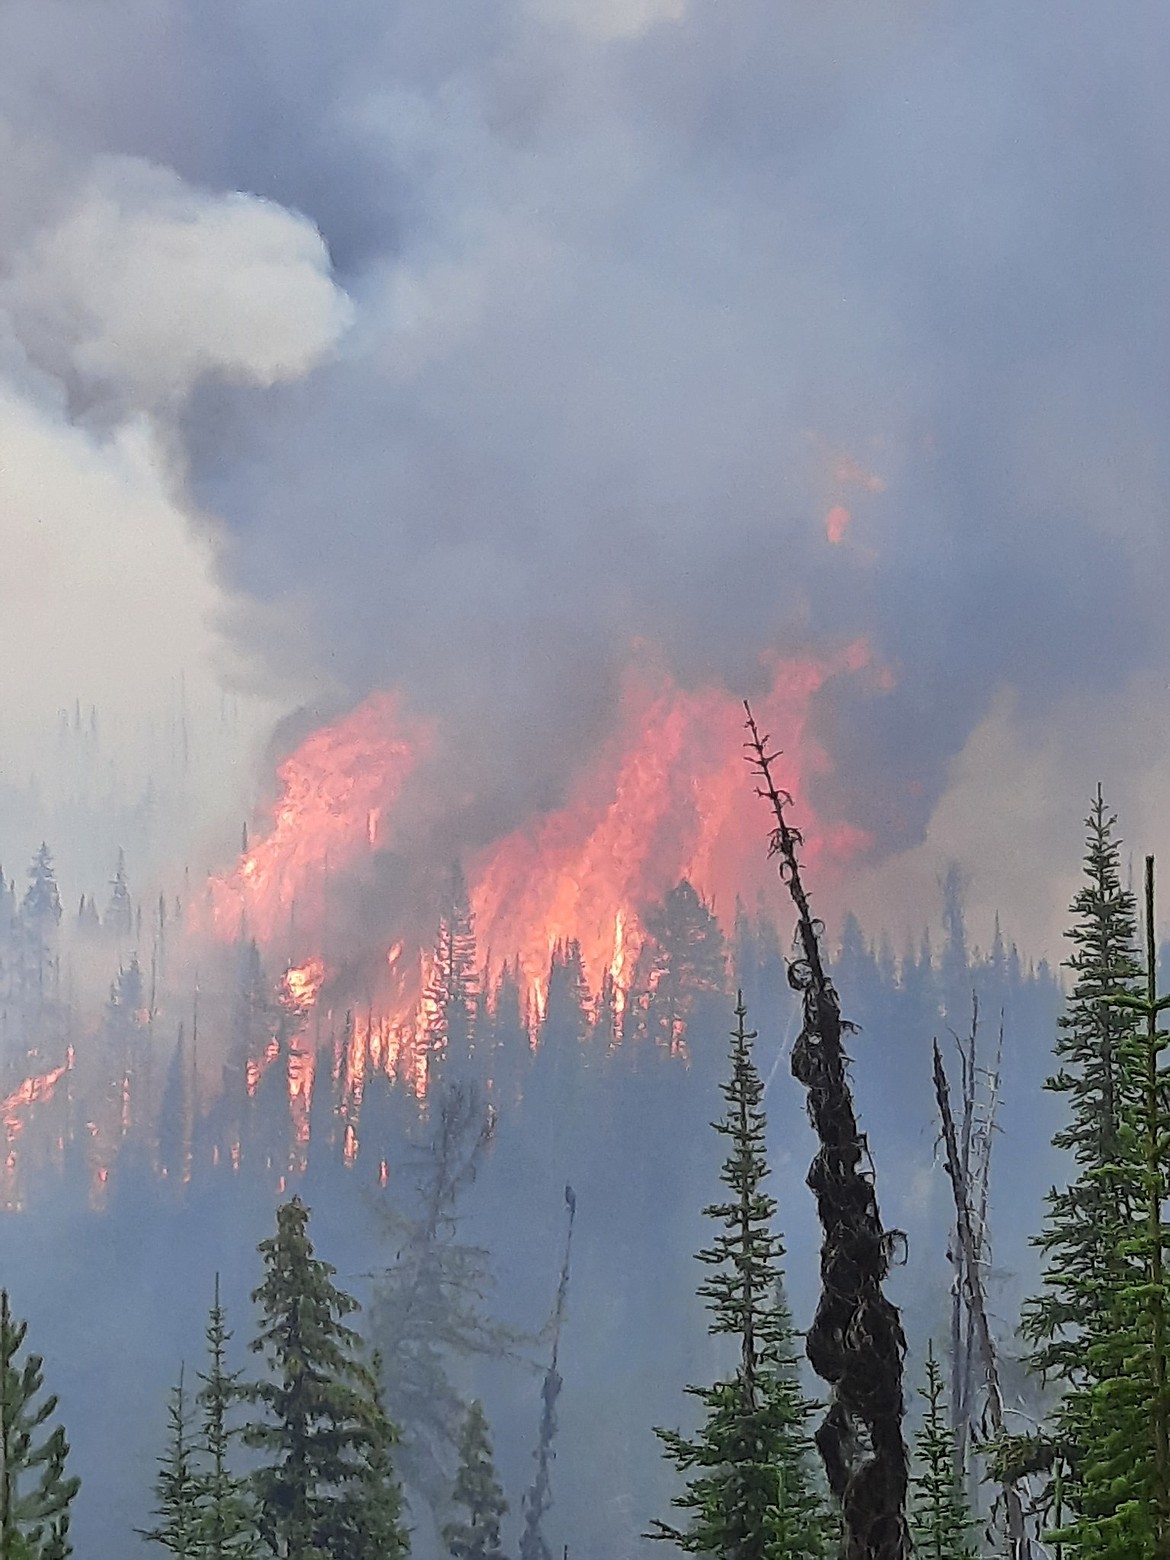 The Weasel Fire exceeded 2,000 acres Friday afternoon. (U.S. Forest Service photo)